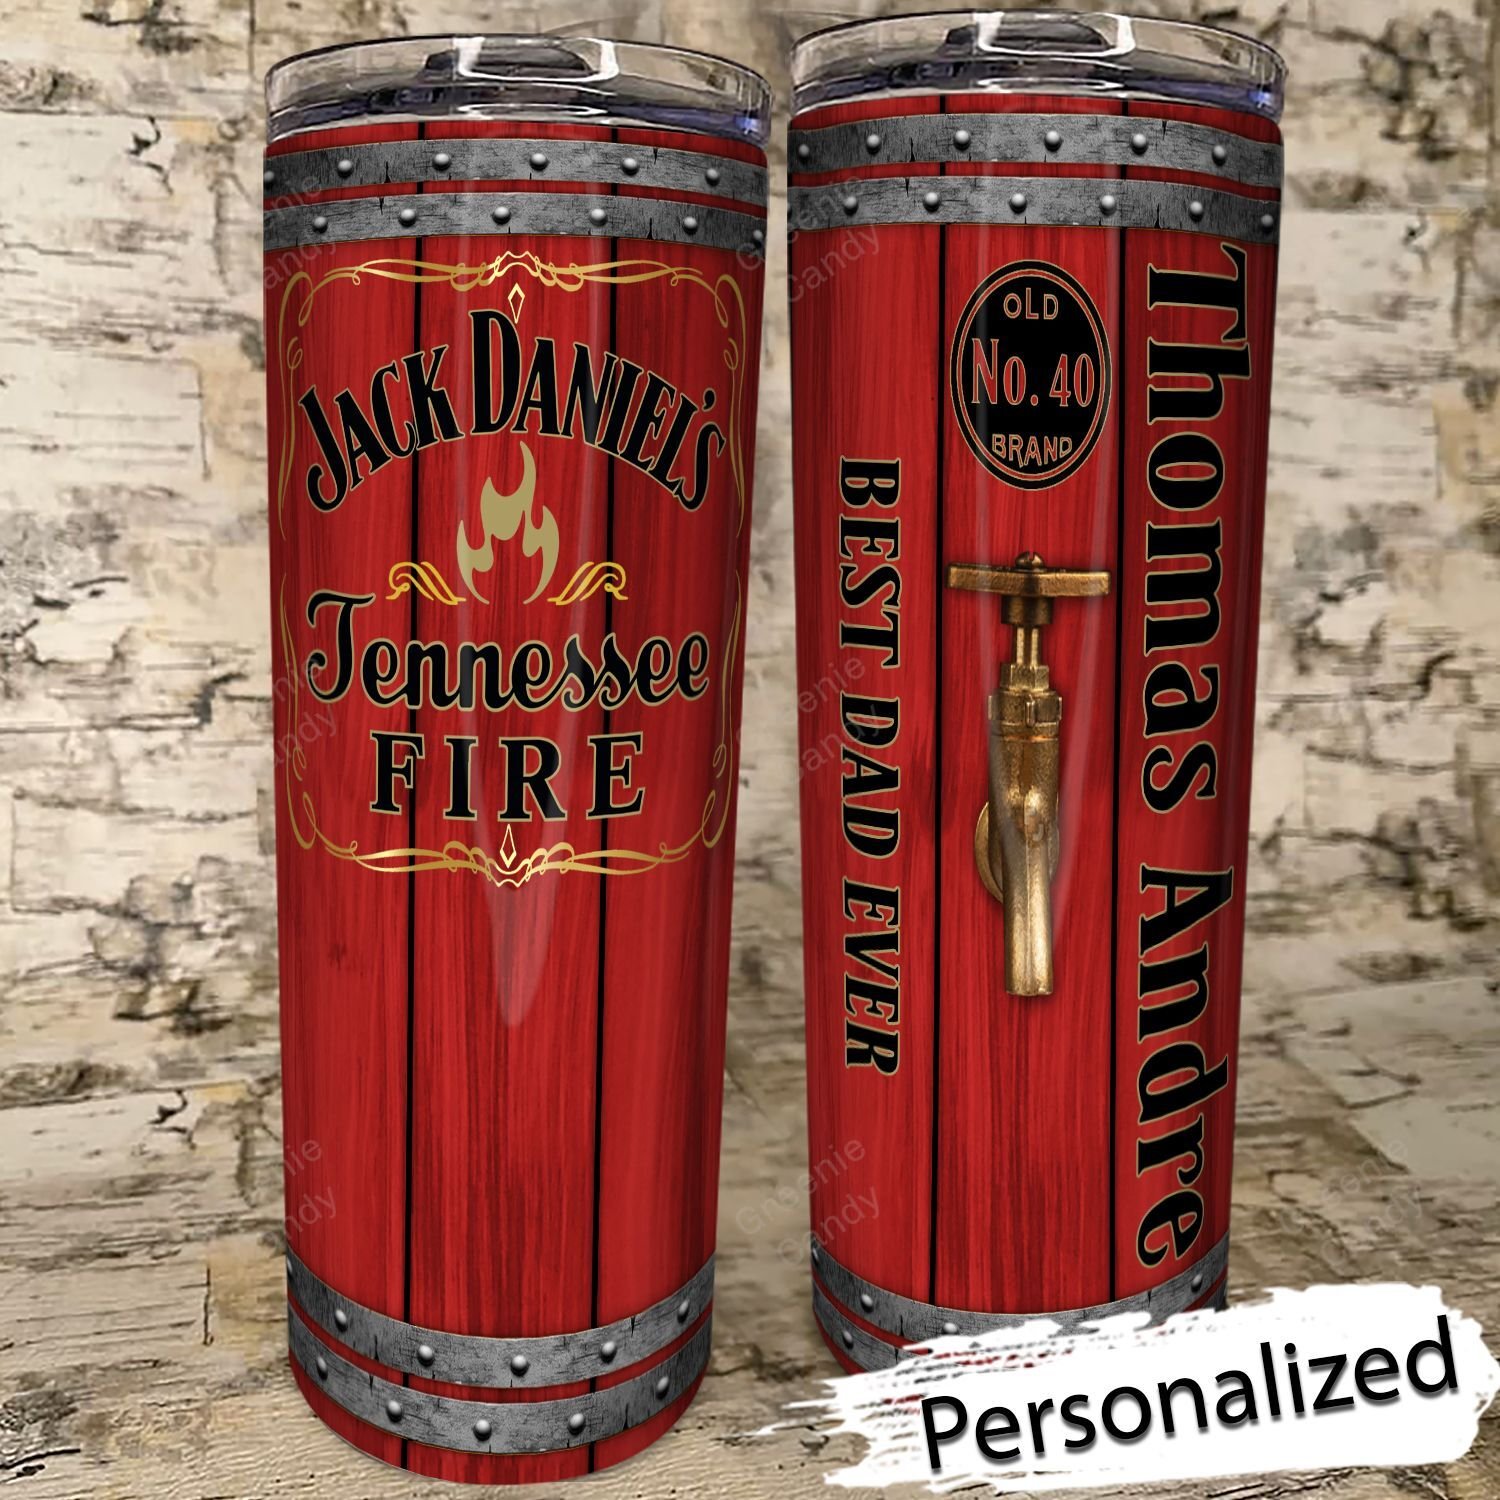 Personalized_Jack_Daniels_Tennessee_Fire_Whiskey_Skinny_Tumbler